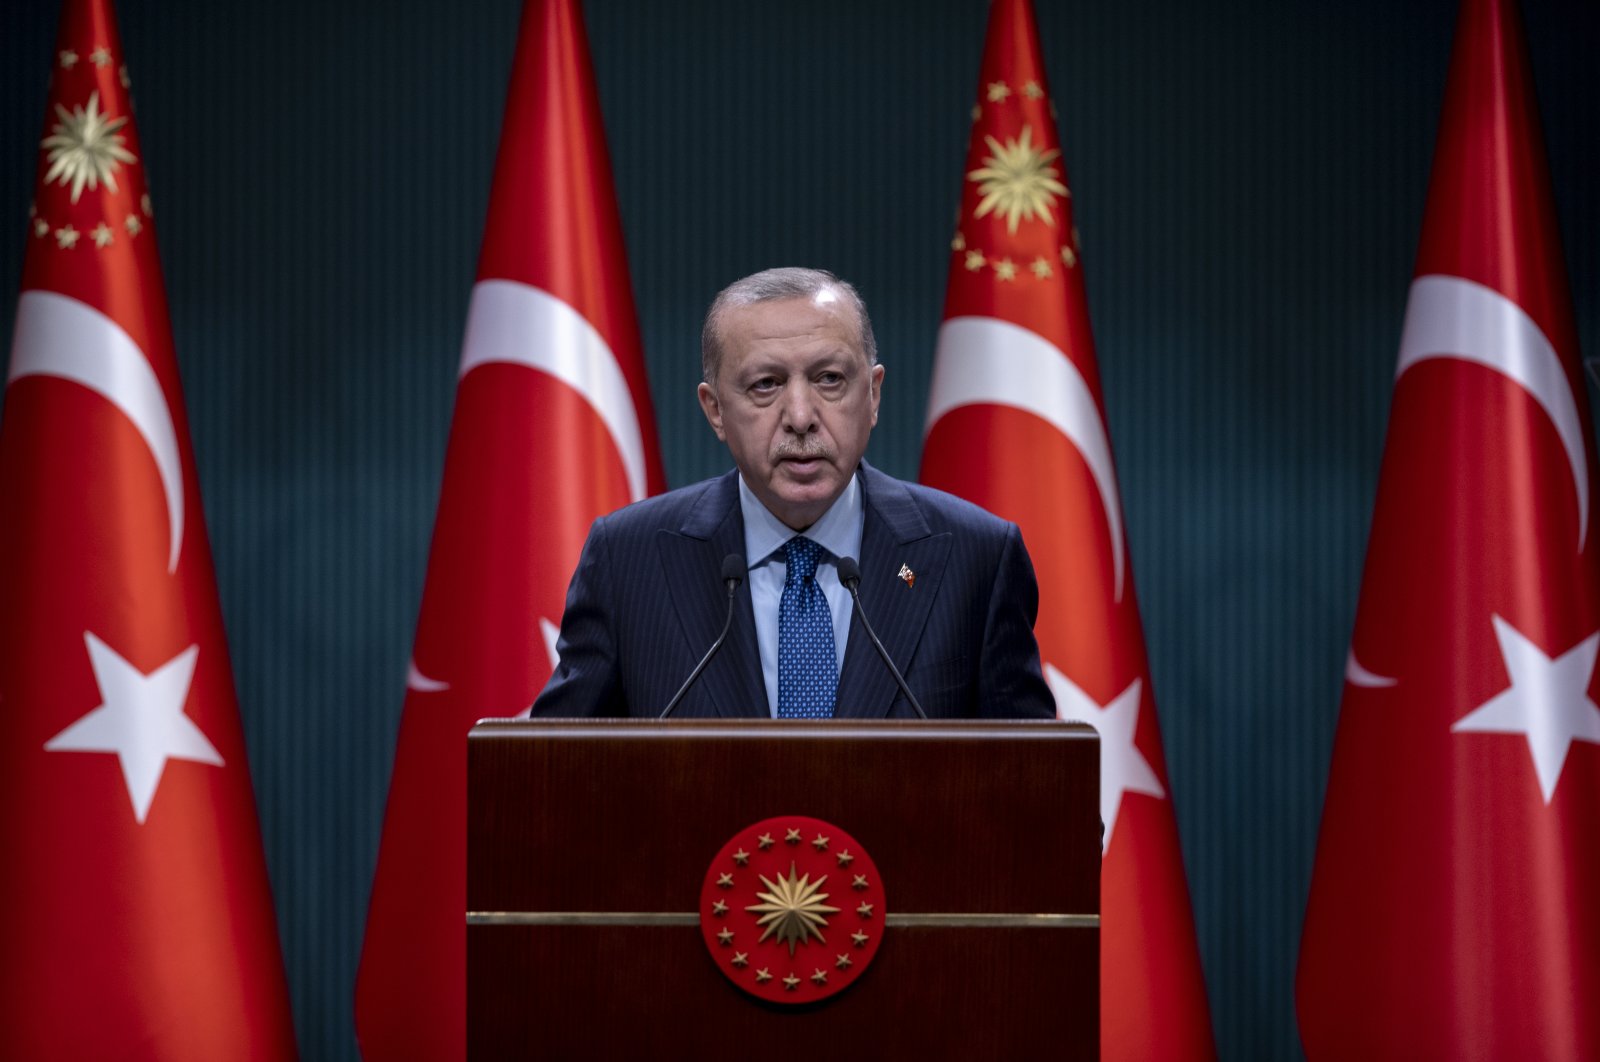 President Recep Tayyip Erdoğan speaks at a news conference following a cabinet meeting in Ankara on Monday, March 1, 2021 (AA Photo)